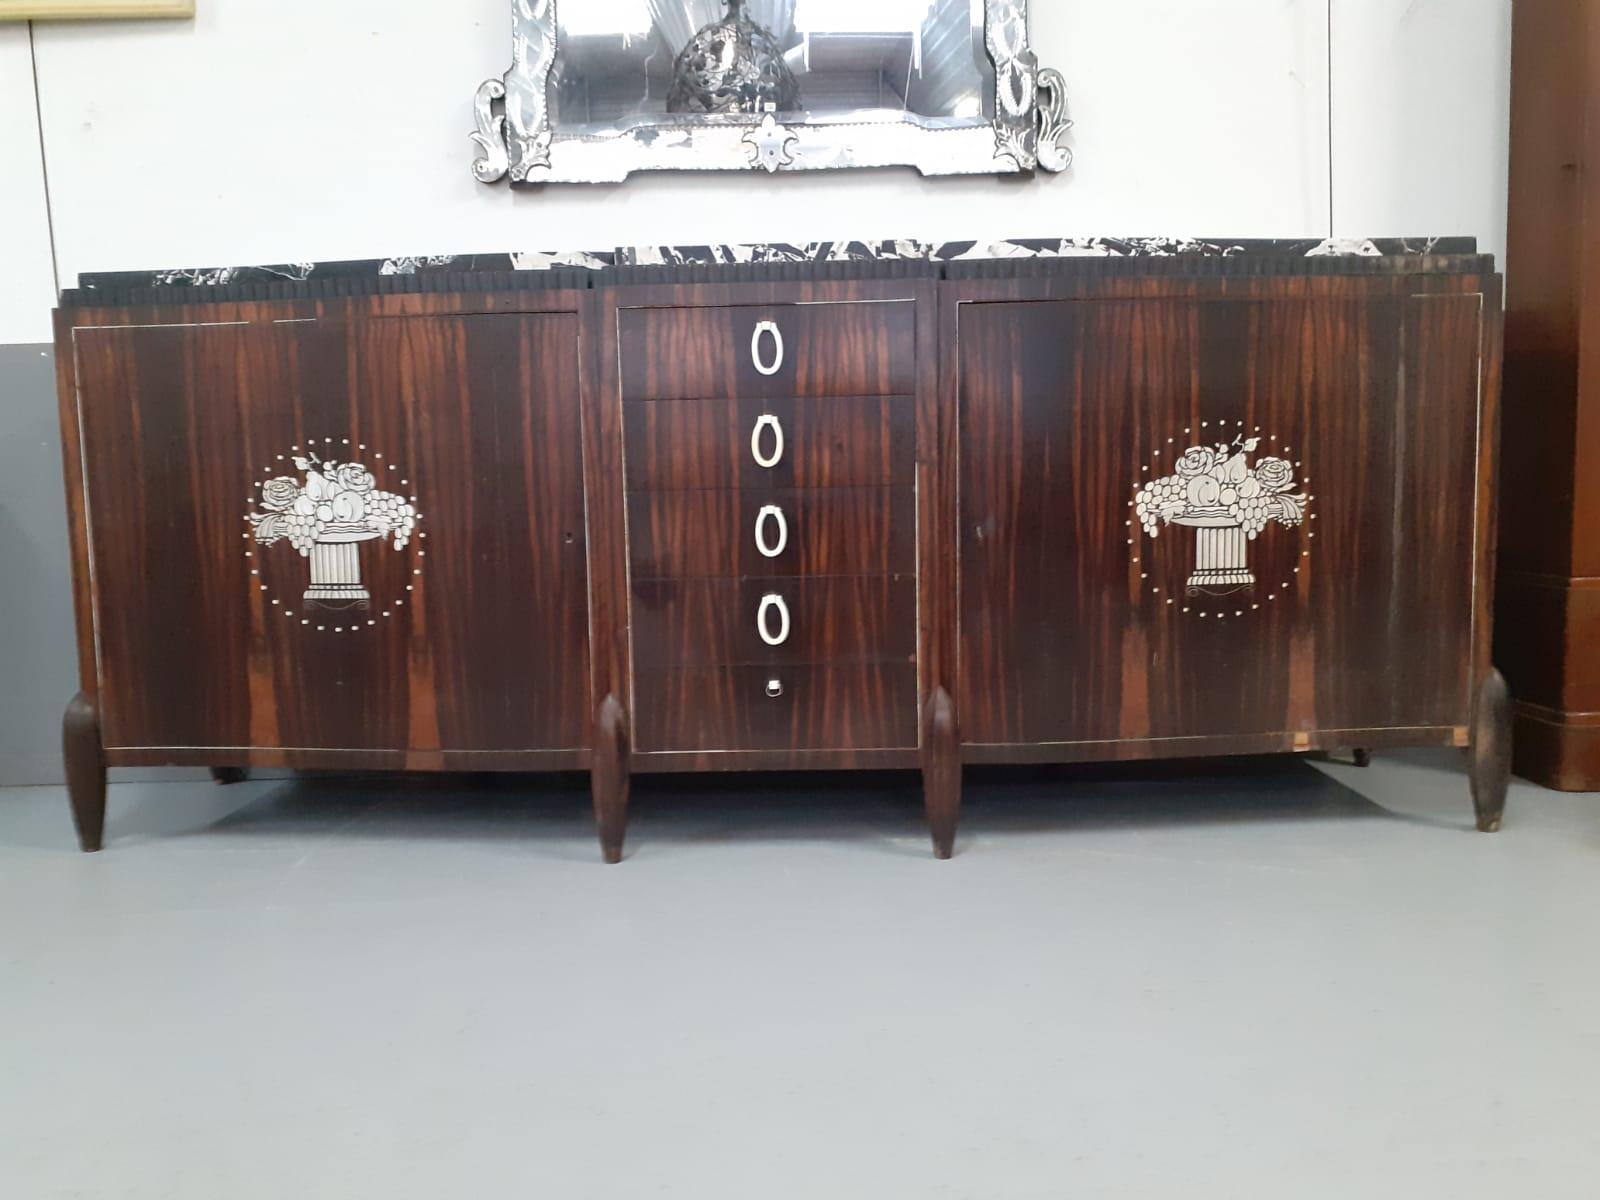 rare large Art Deco sideboard in macassar ebony veneer circa 1925.
handles and decoration in ivory.
top covered with a marble.
good condition ,
missing a handle (which will be reproduced)
small gaps in the decor.
  